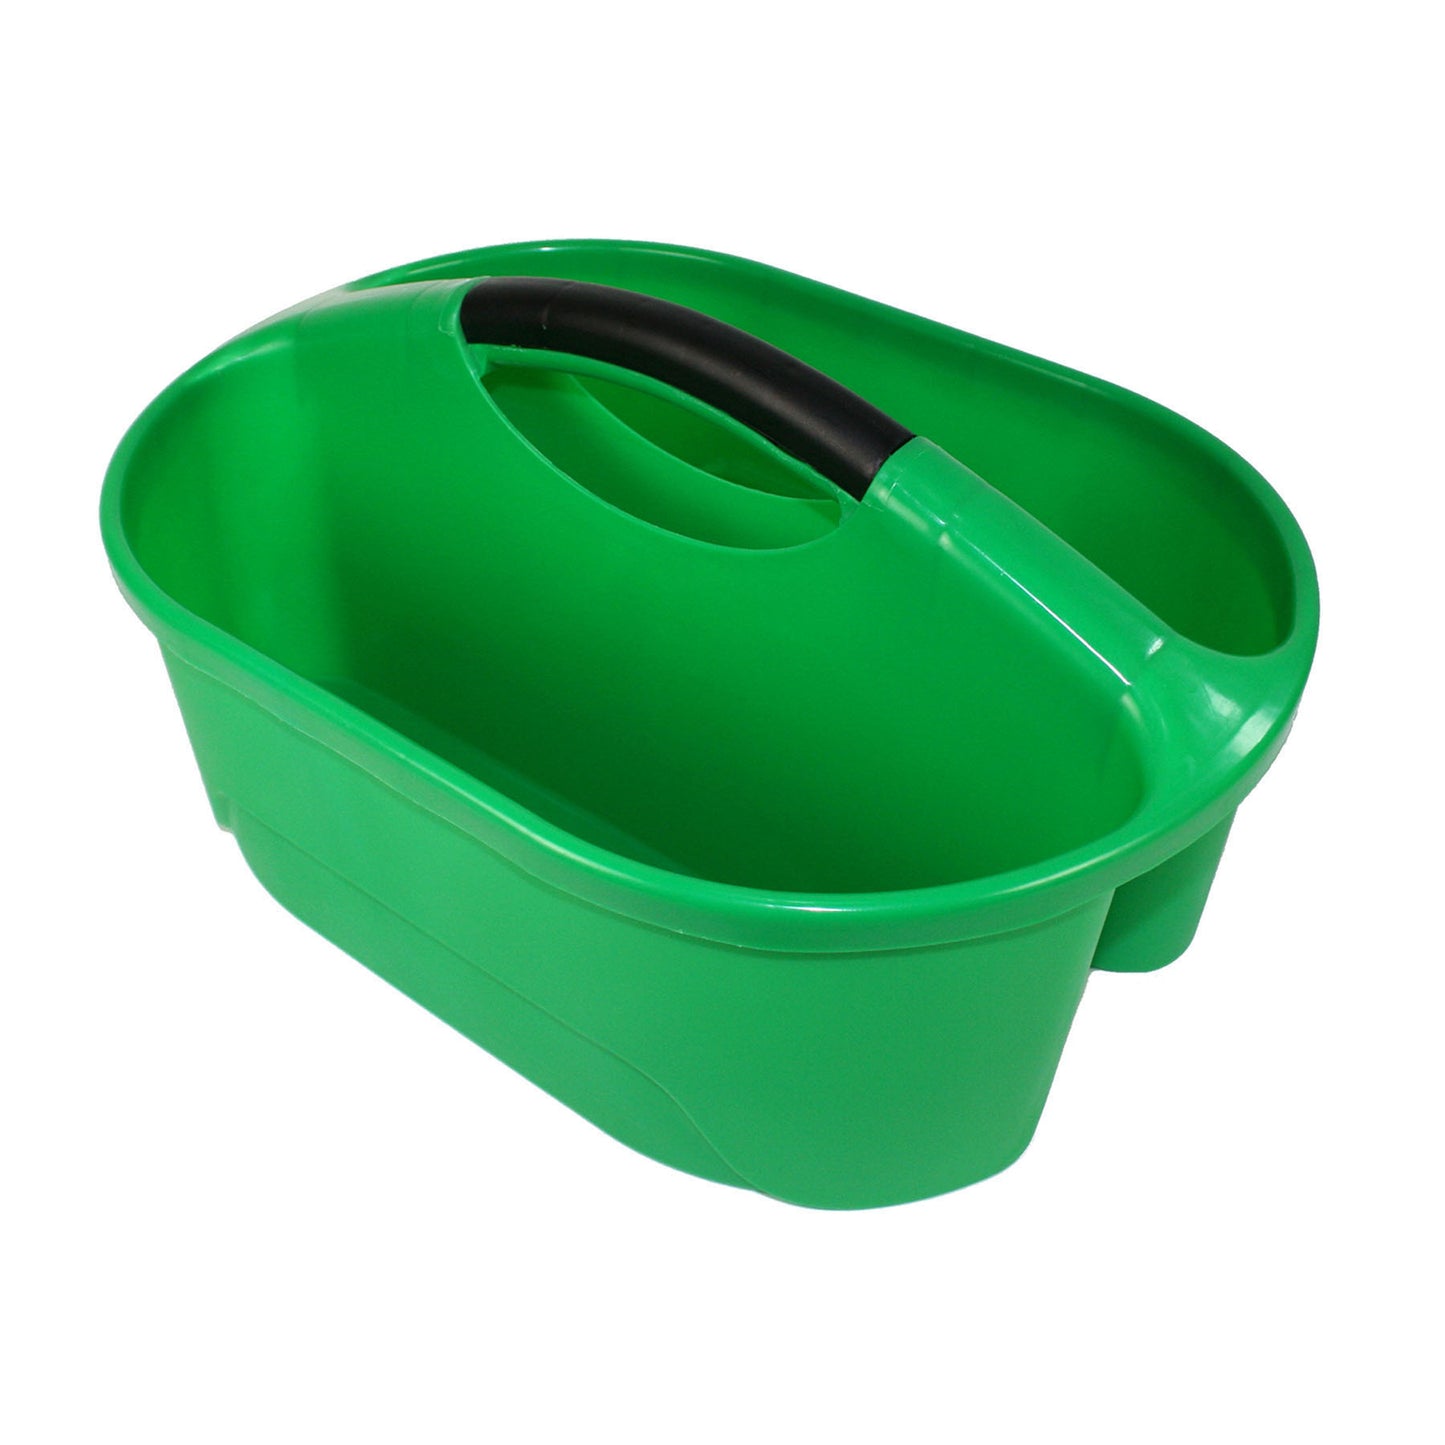 Classroom Caddy, Green, Pack of 2